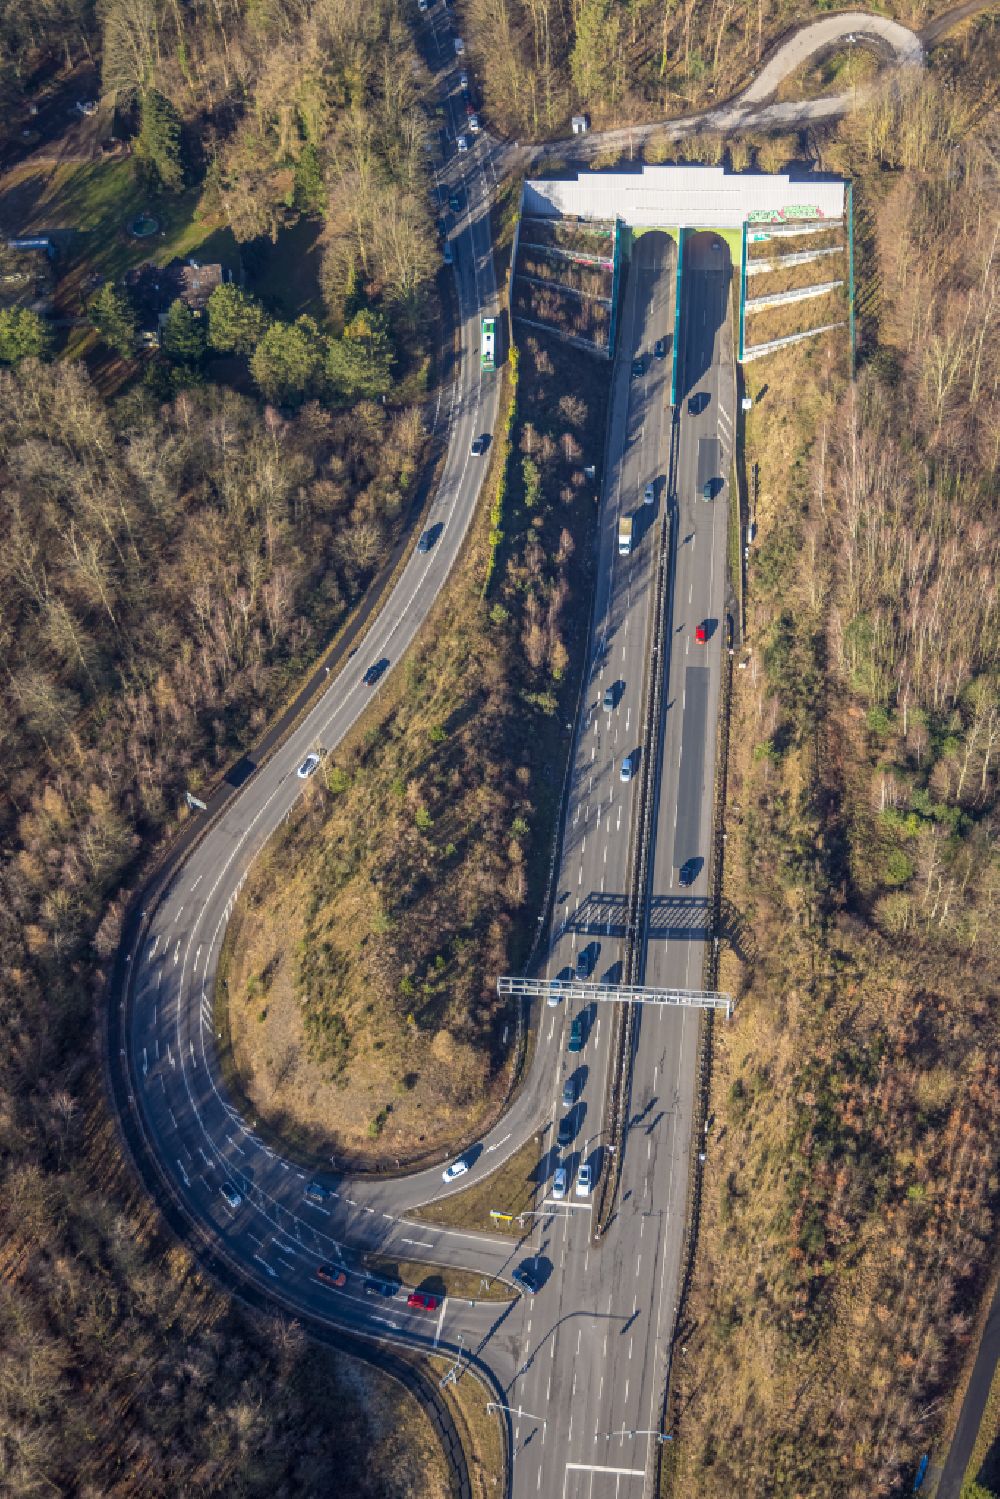 Aerial image Dortmund - Entrance and exit of the tunnel structure on street Berghofer Strasse in the district Aplerbecker Mark in Dortmund at Ruhrgebiet in the state North Rhine-Westphalia, Germany